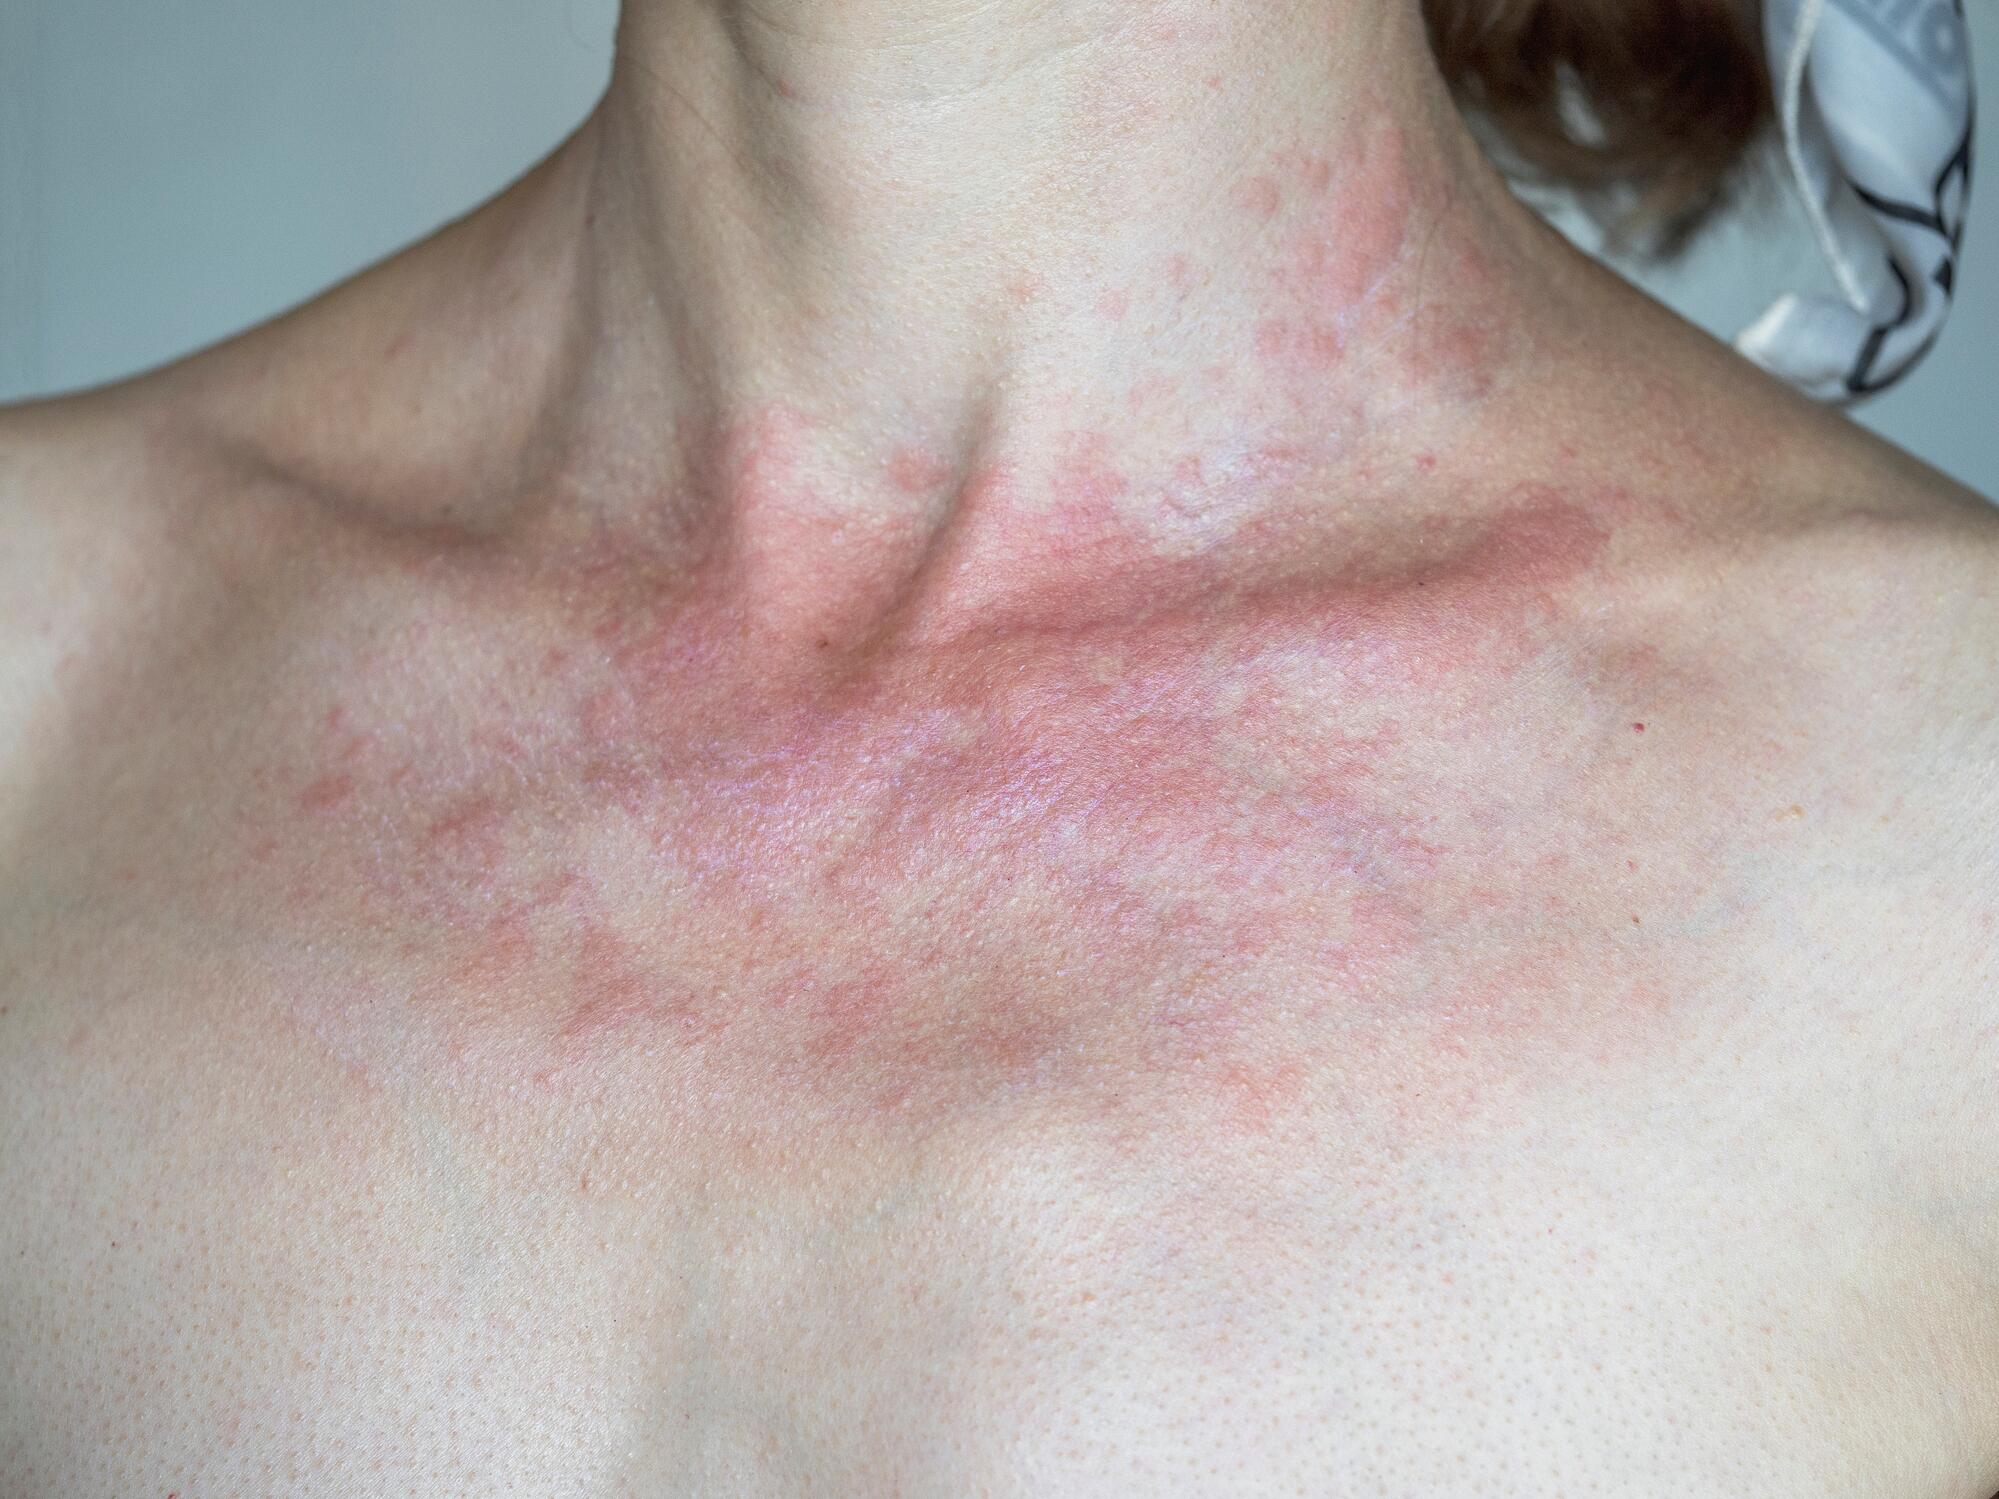 OG_SOLAR_DERMATITIS_WOMAN_WITH_RED_SKIN_BURNED_BY_THE_SUN_ISTOCK_2023